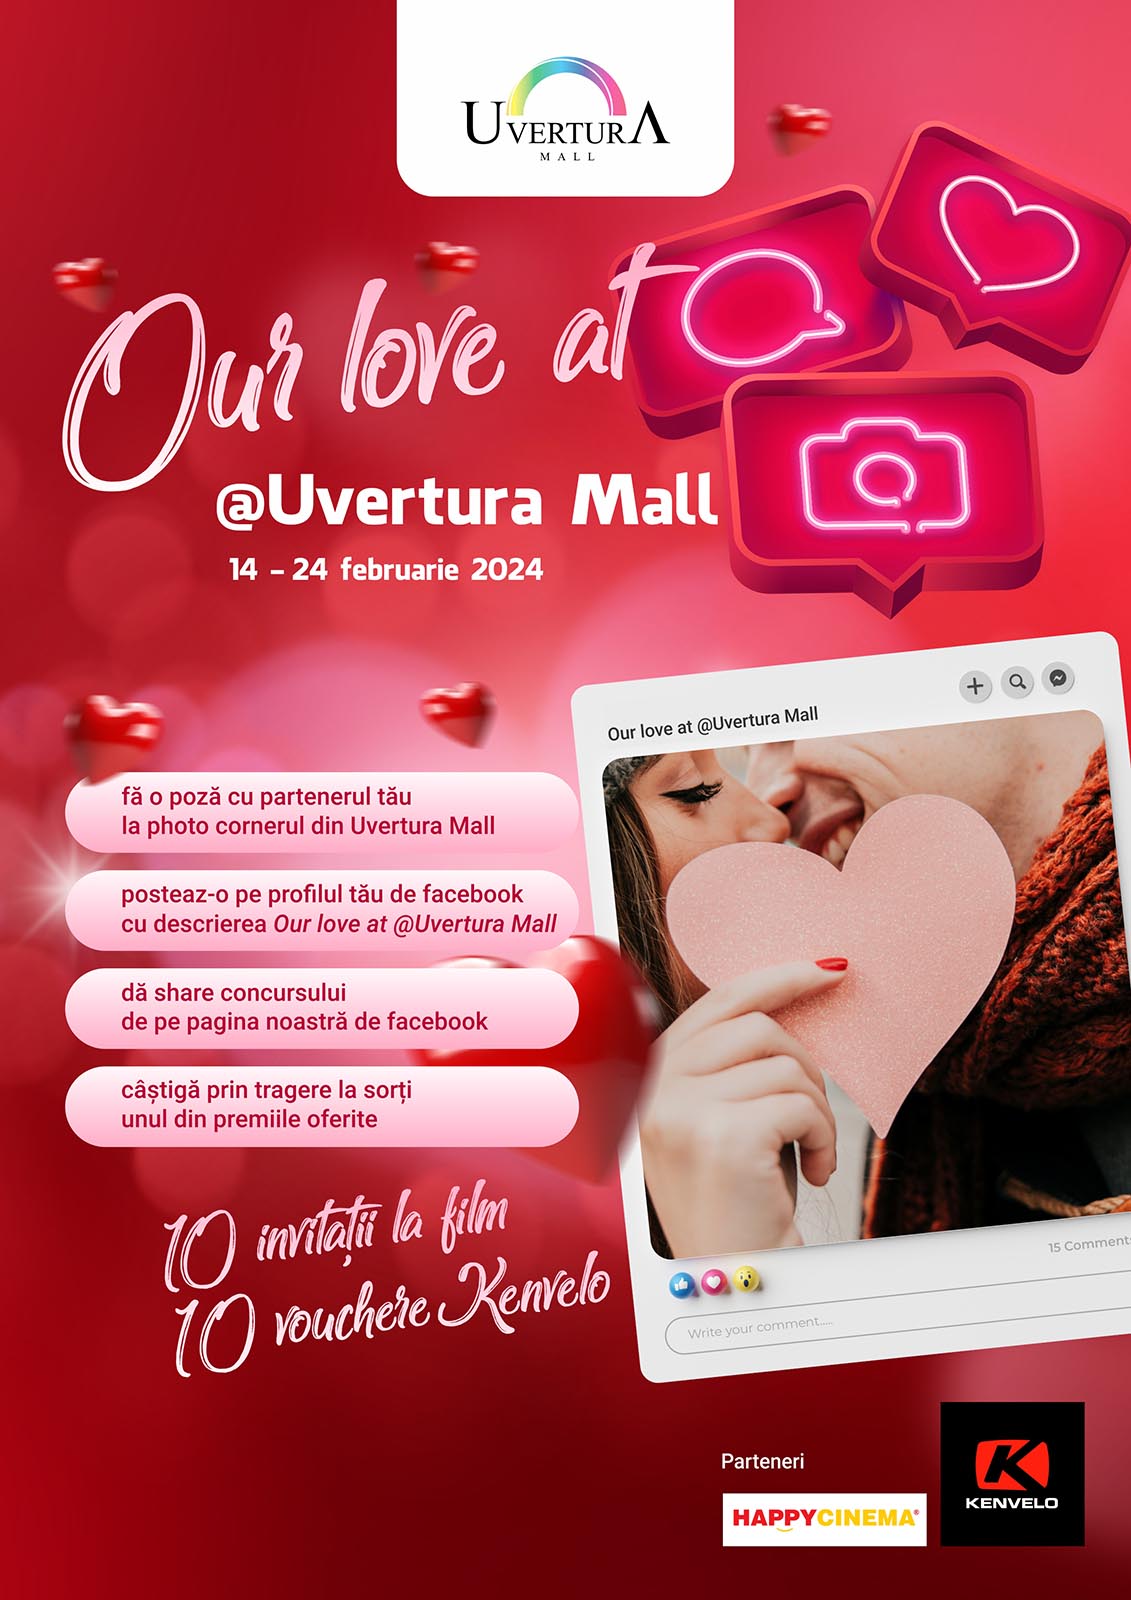 Our love @ Uvertura Mall